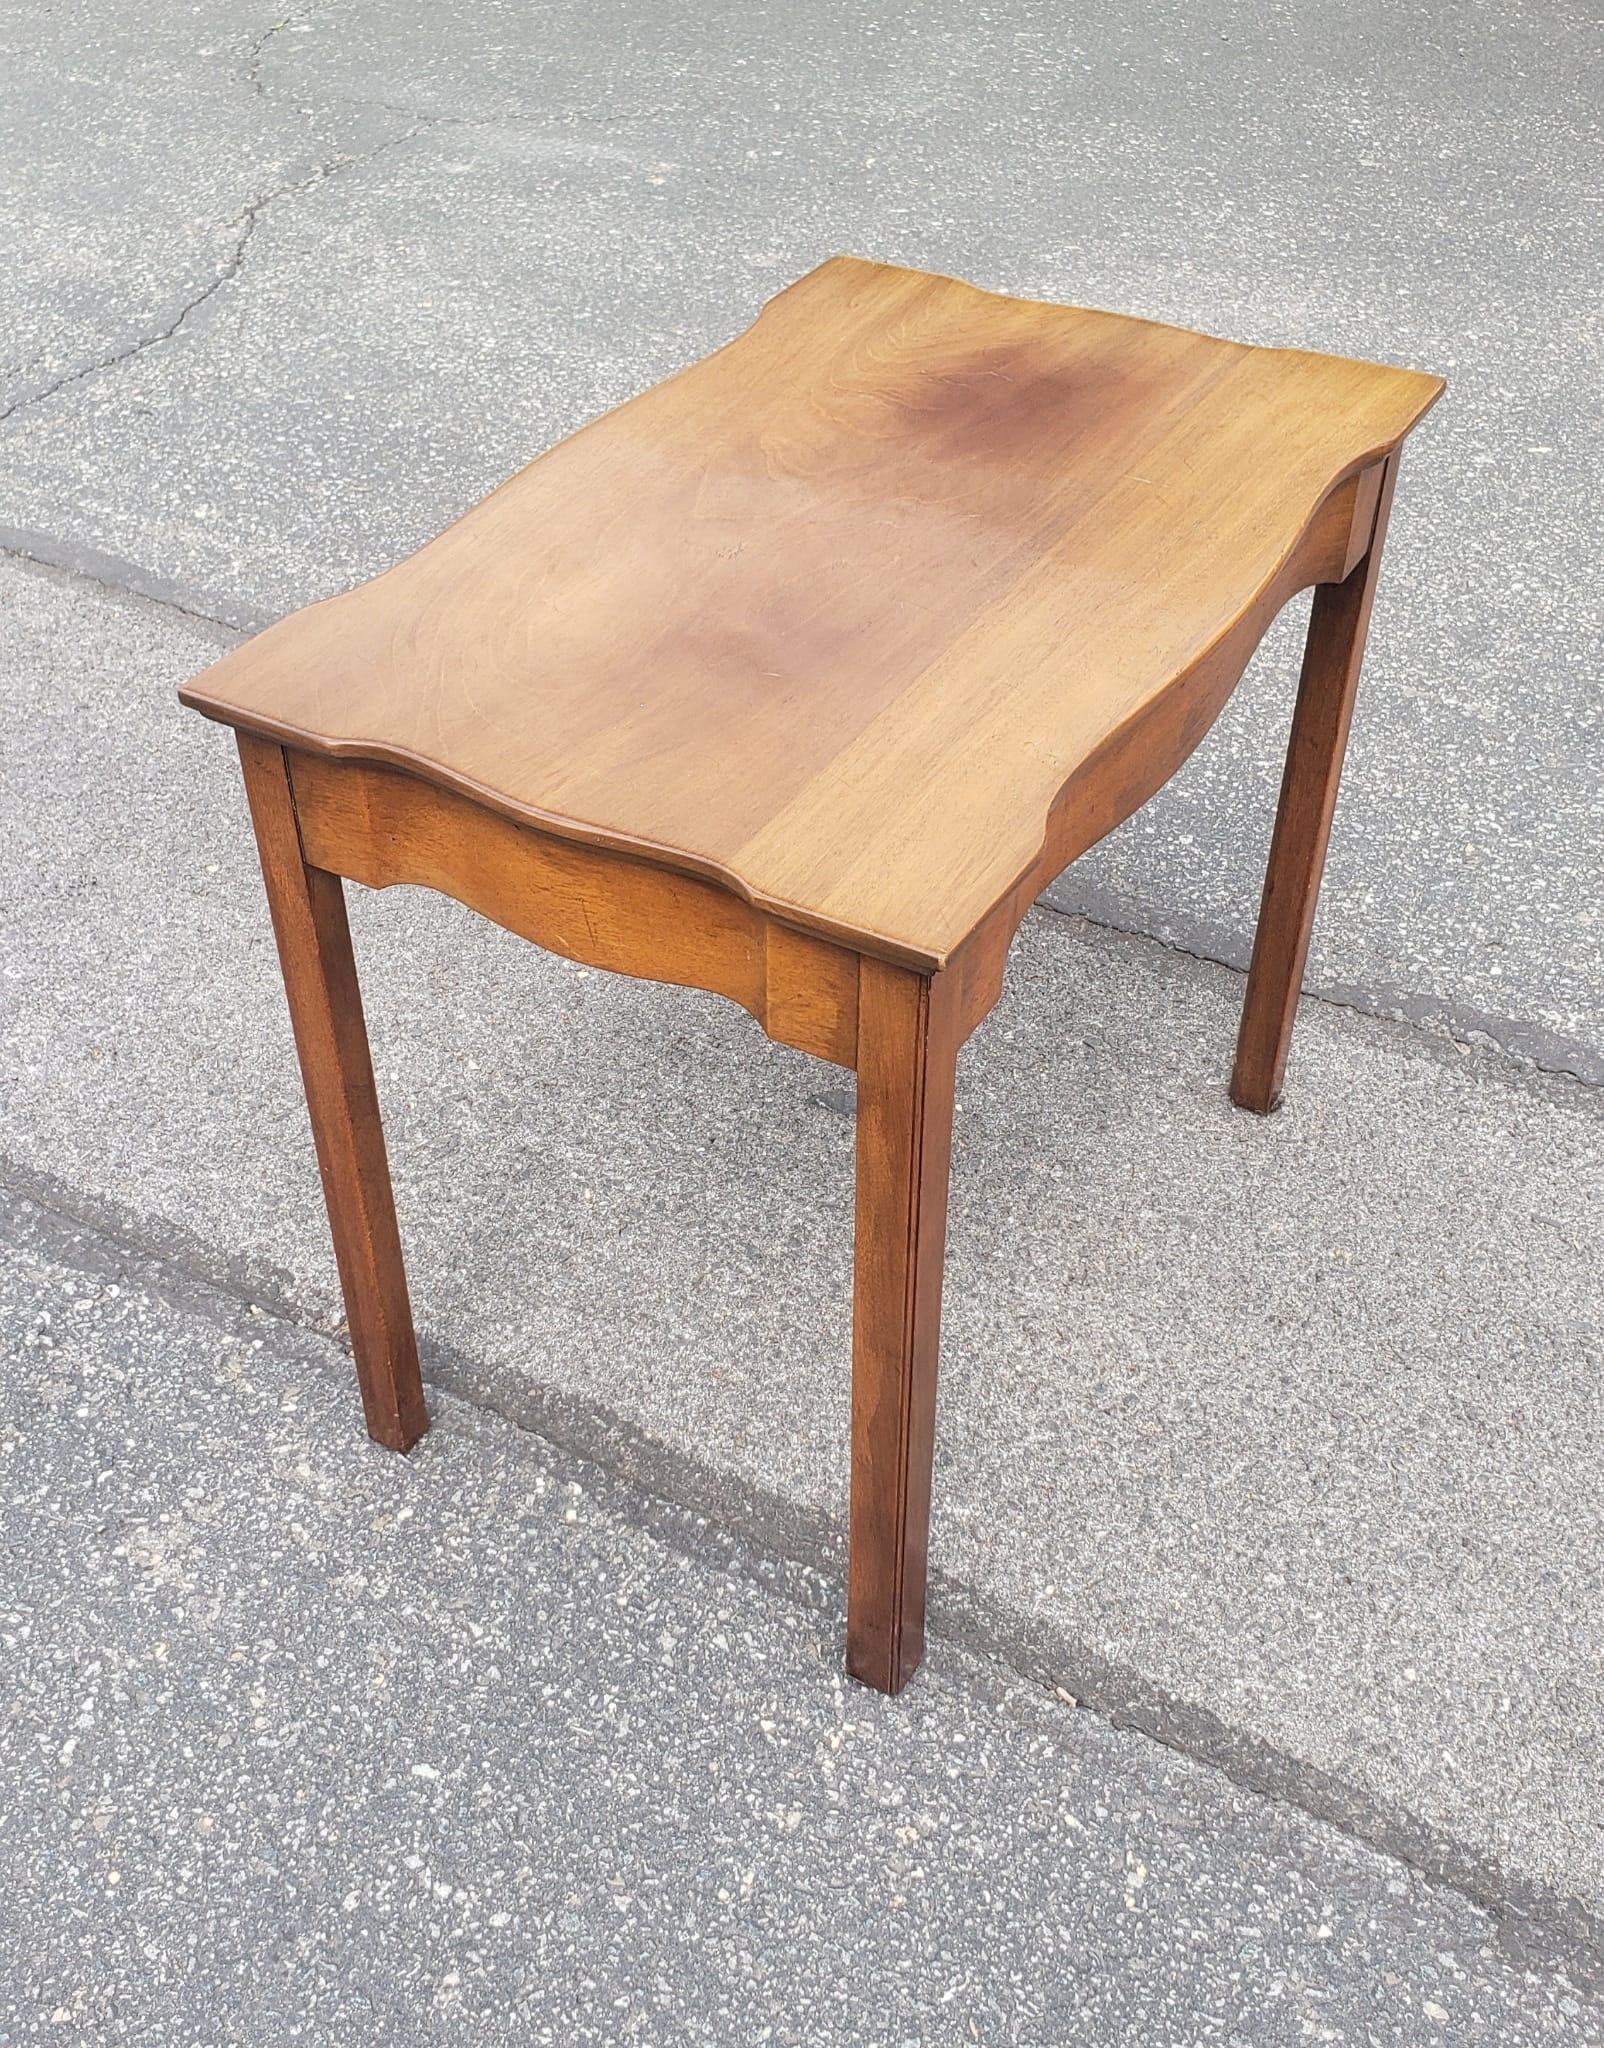 A 1950s Kittinger Buffalo Mahogany Rectangular Side Table. Refinished not too long ago and in good vintage and steady condition. measures 17.5